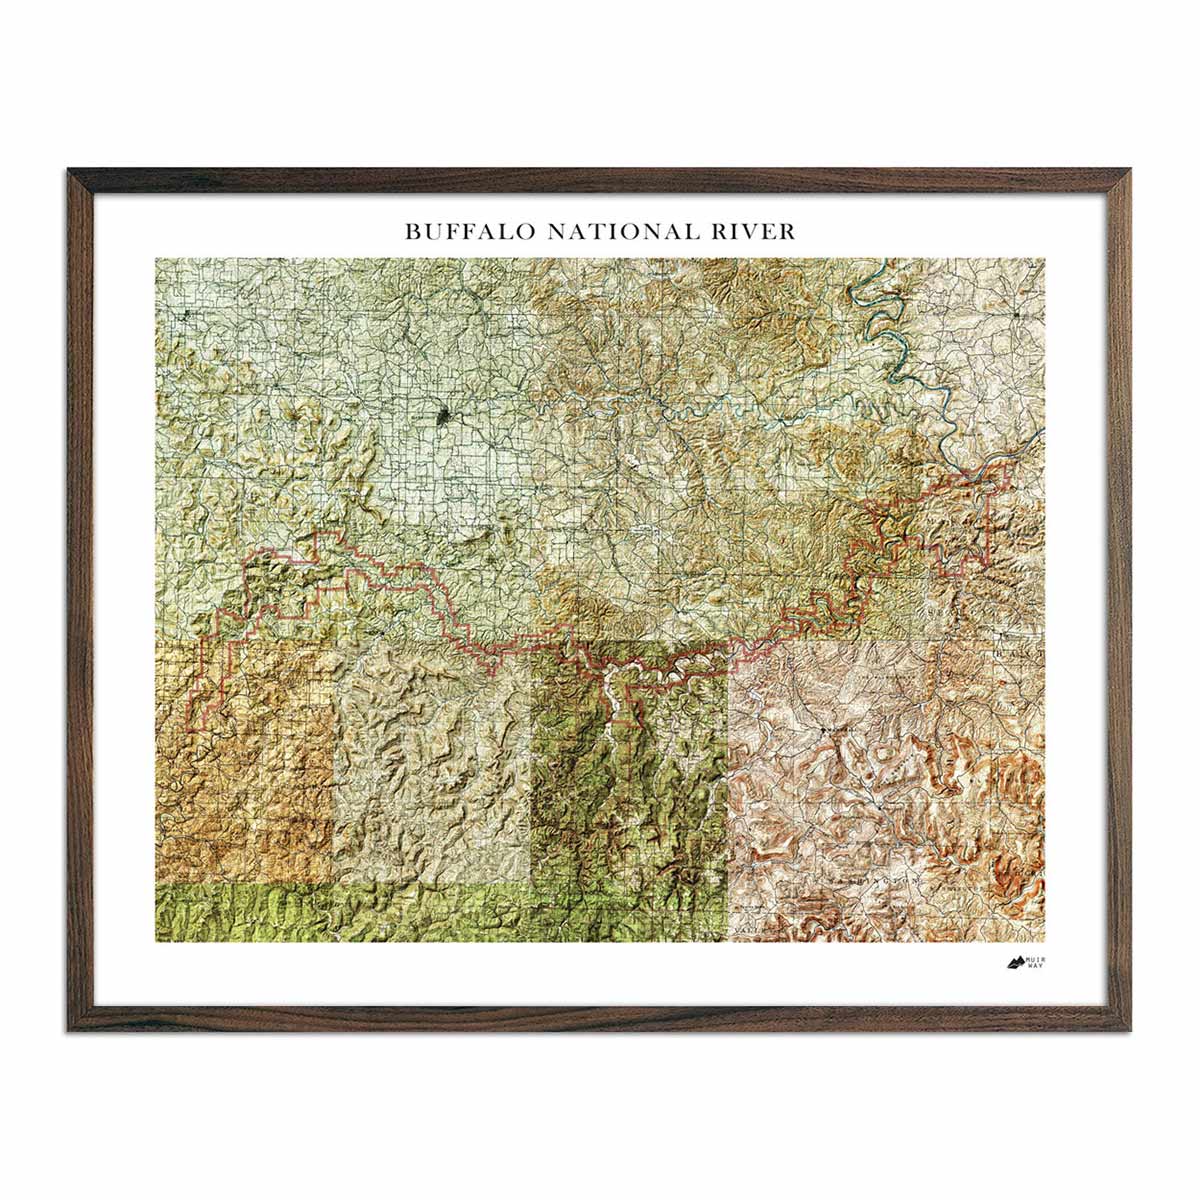  Historic Map - National Atlas - 1956 Shell Highway Map of  Arkansas-Louisiana, Mississippi. - Vintage Wall Art - 44in x 66in: Posters  & Prints